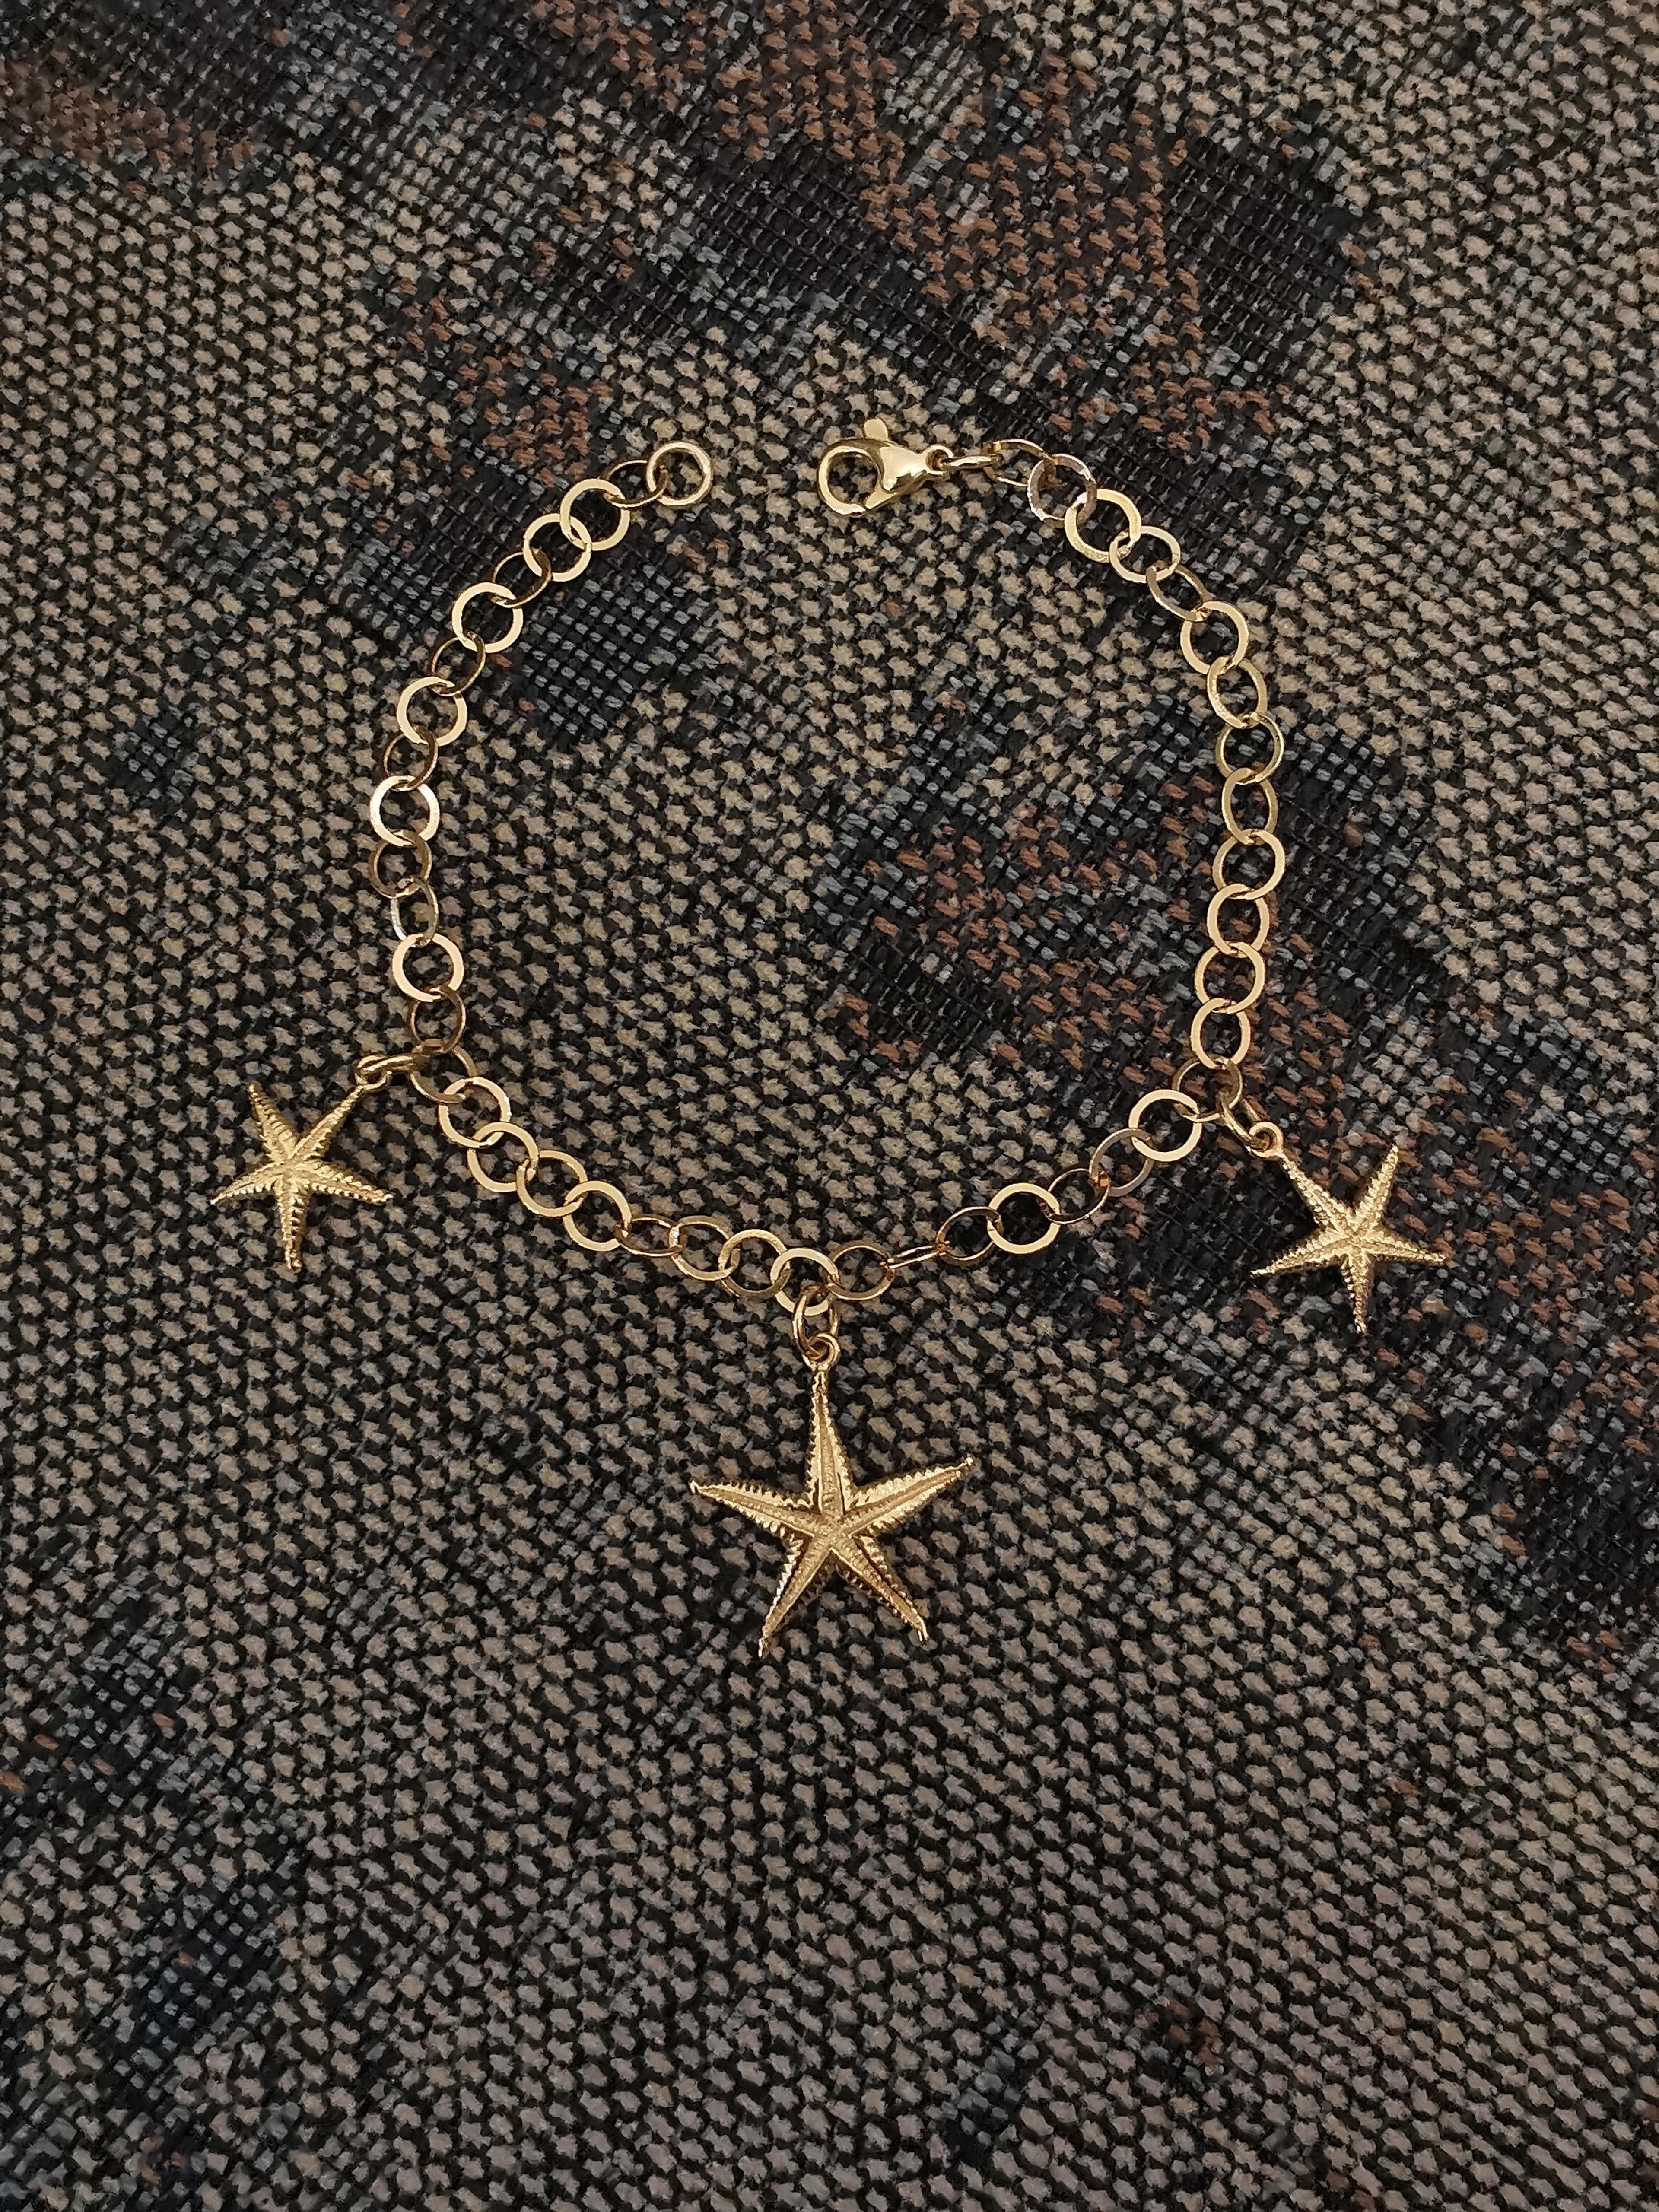 18 Karat Solid Yellow Gold Starfish Chain Bracelet In New Condition For Sale In Cattolica, IT